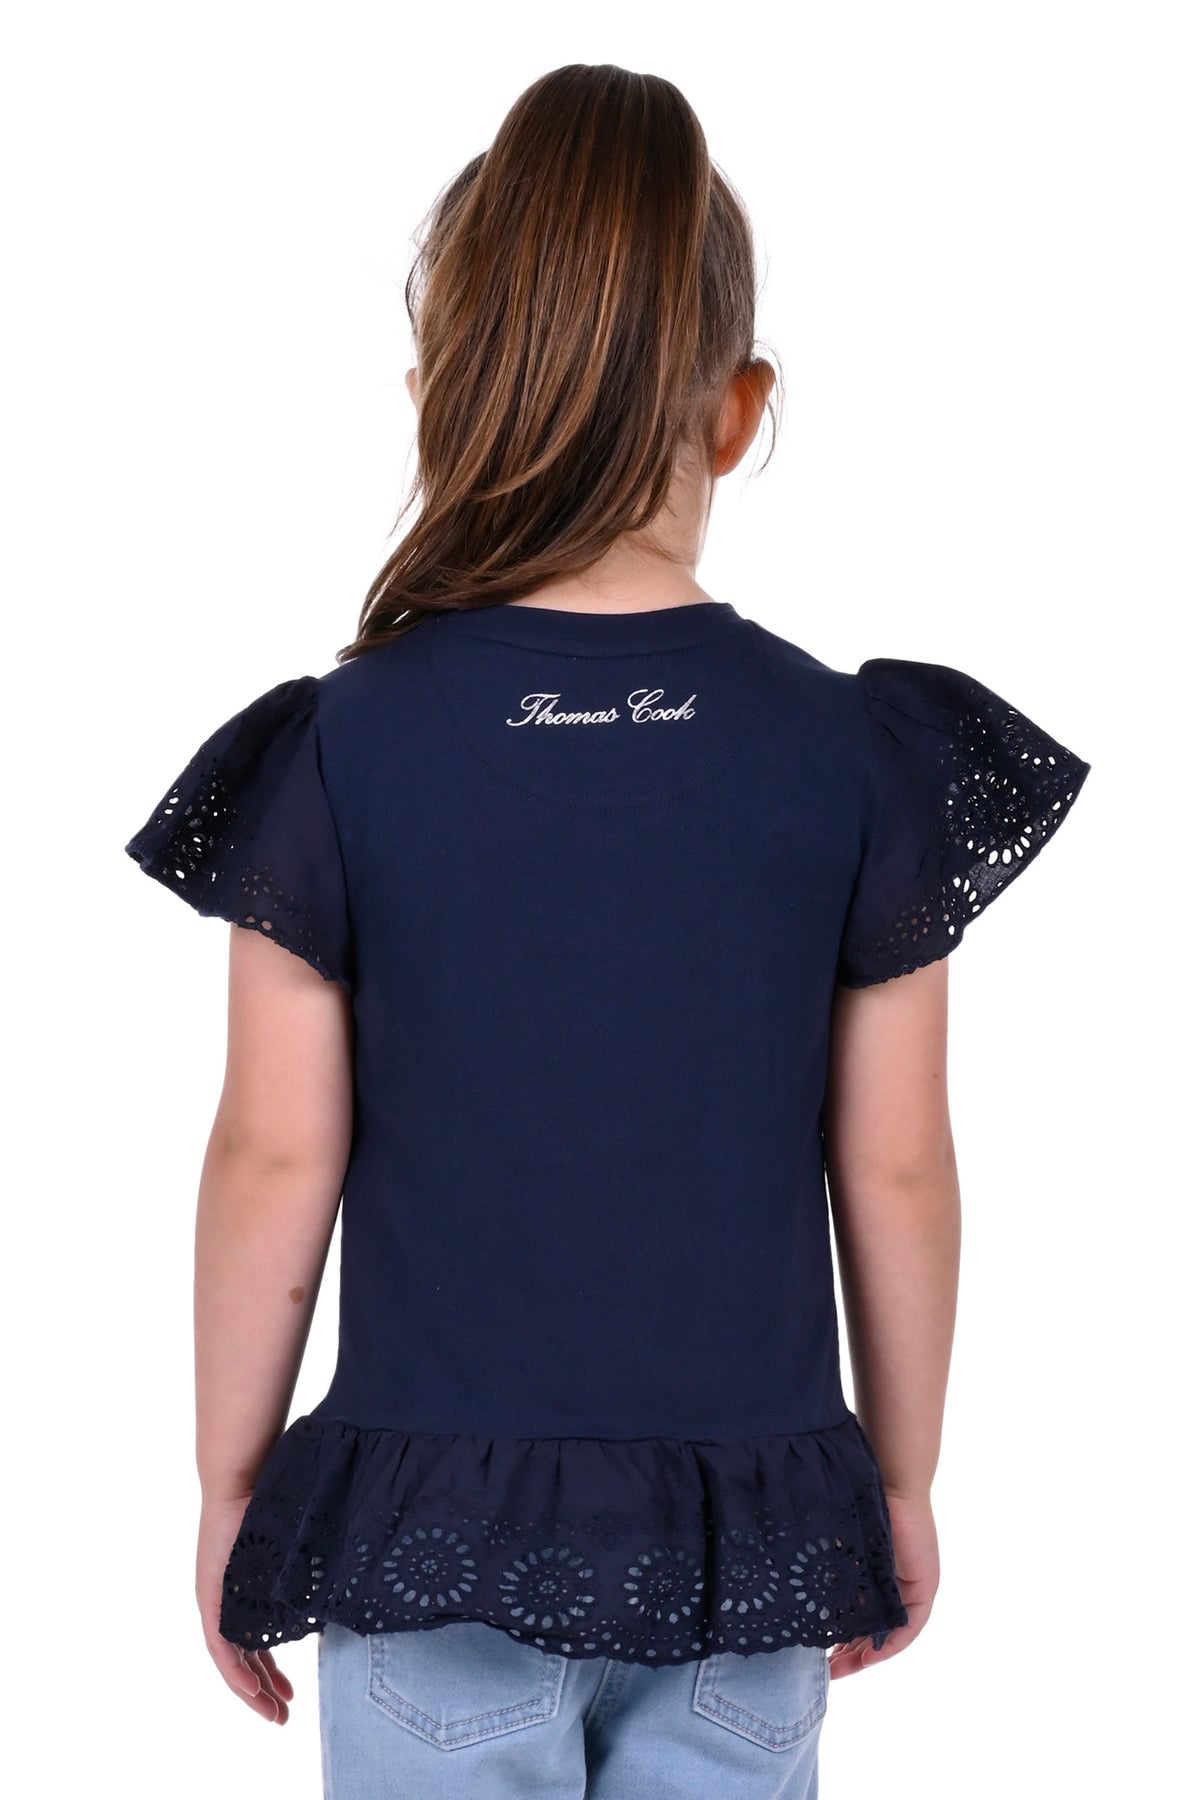 Thomas Cook Girls Lucy Tee - Navy